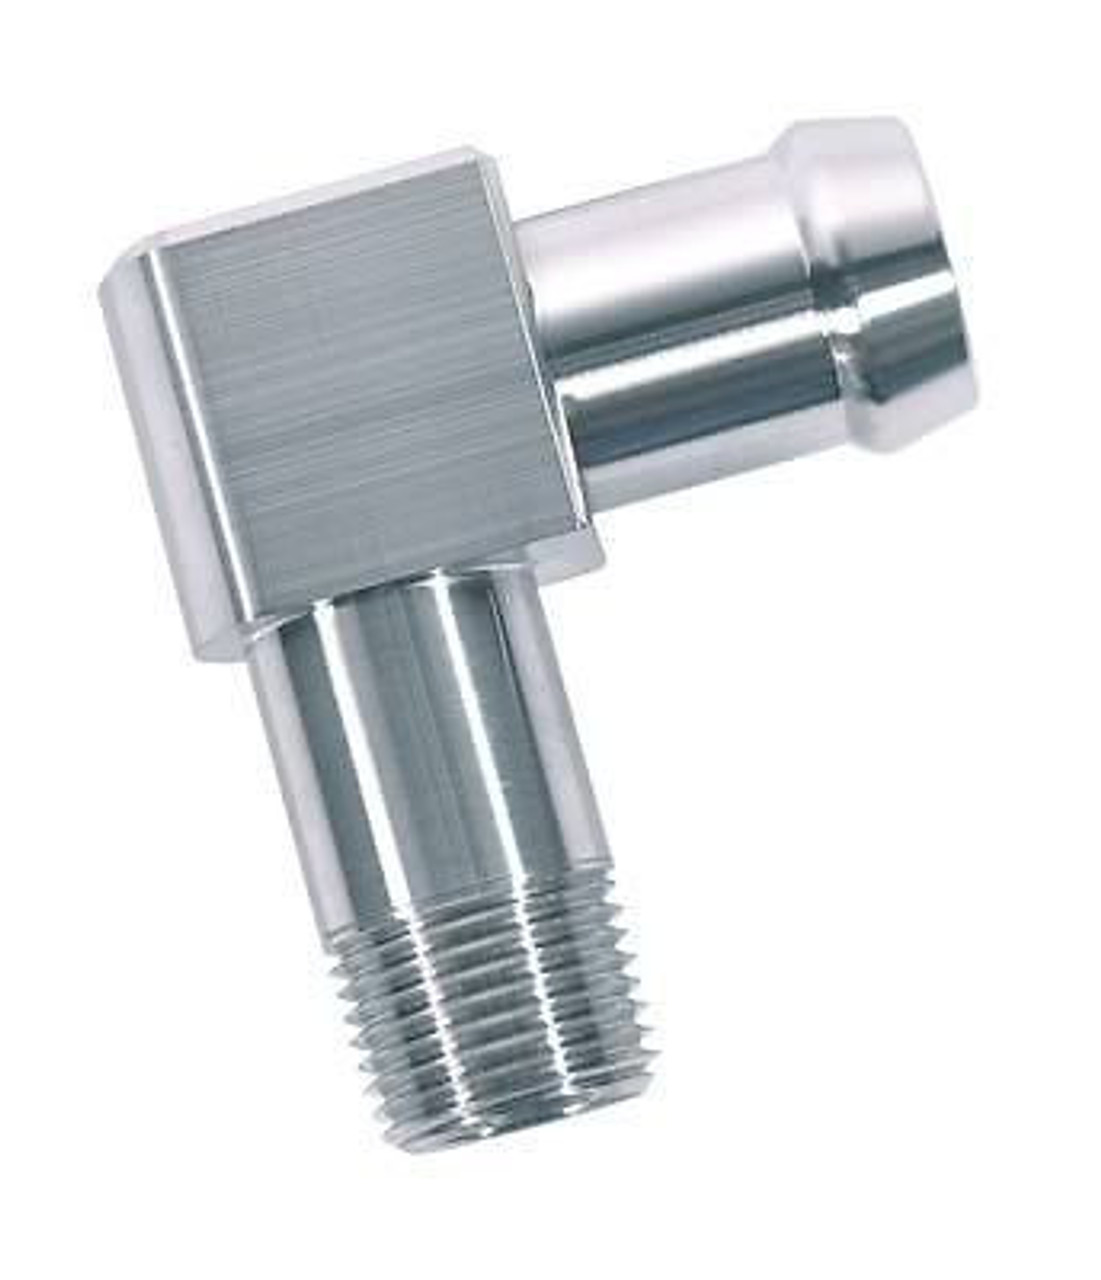 Heater Hose Fitting 90 Degree Stainless Steel - Made in USA!